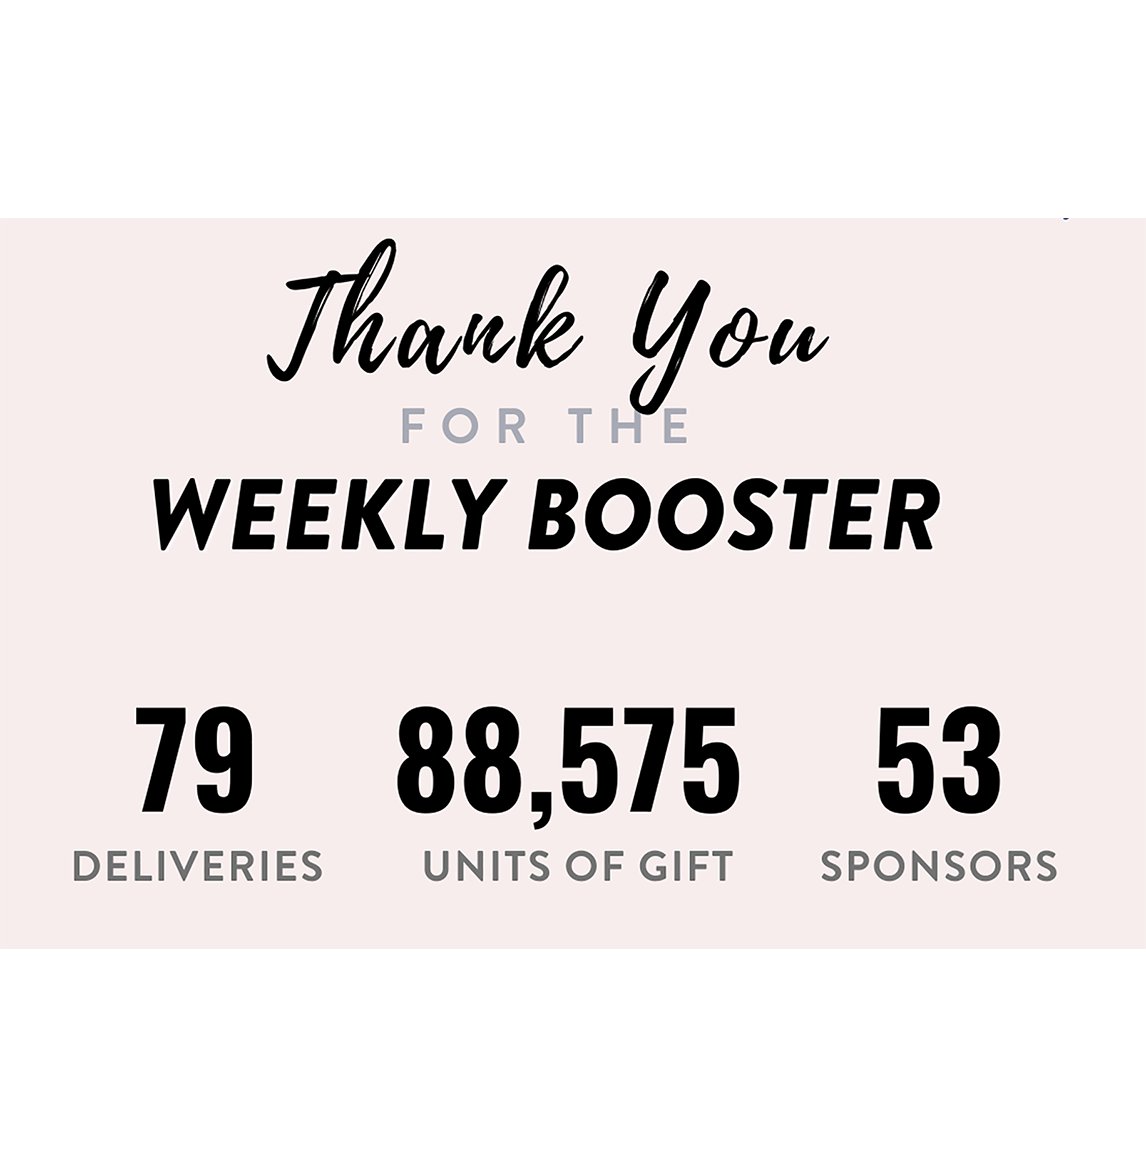 Thank you for the Weekly Booster!